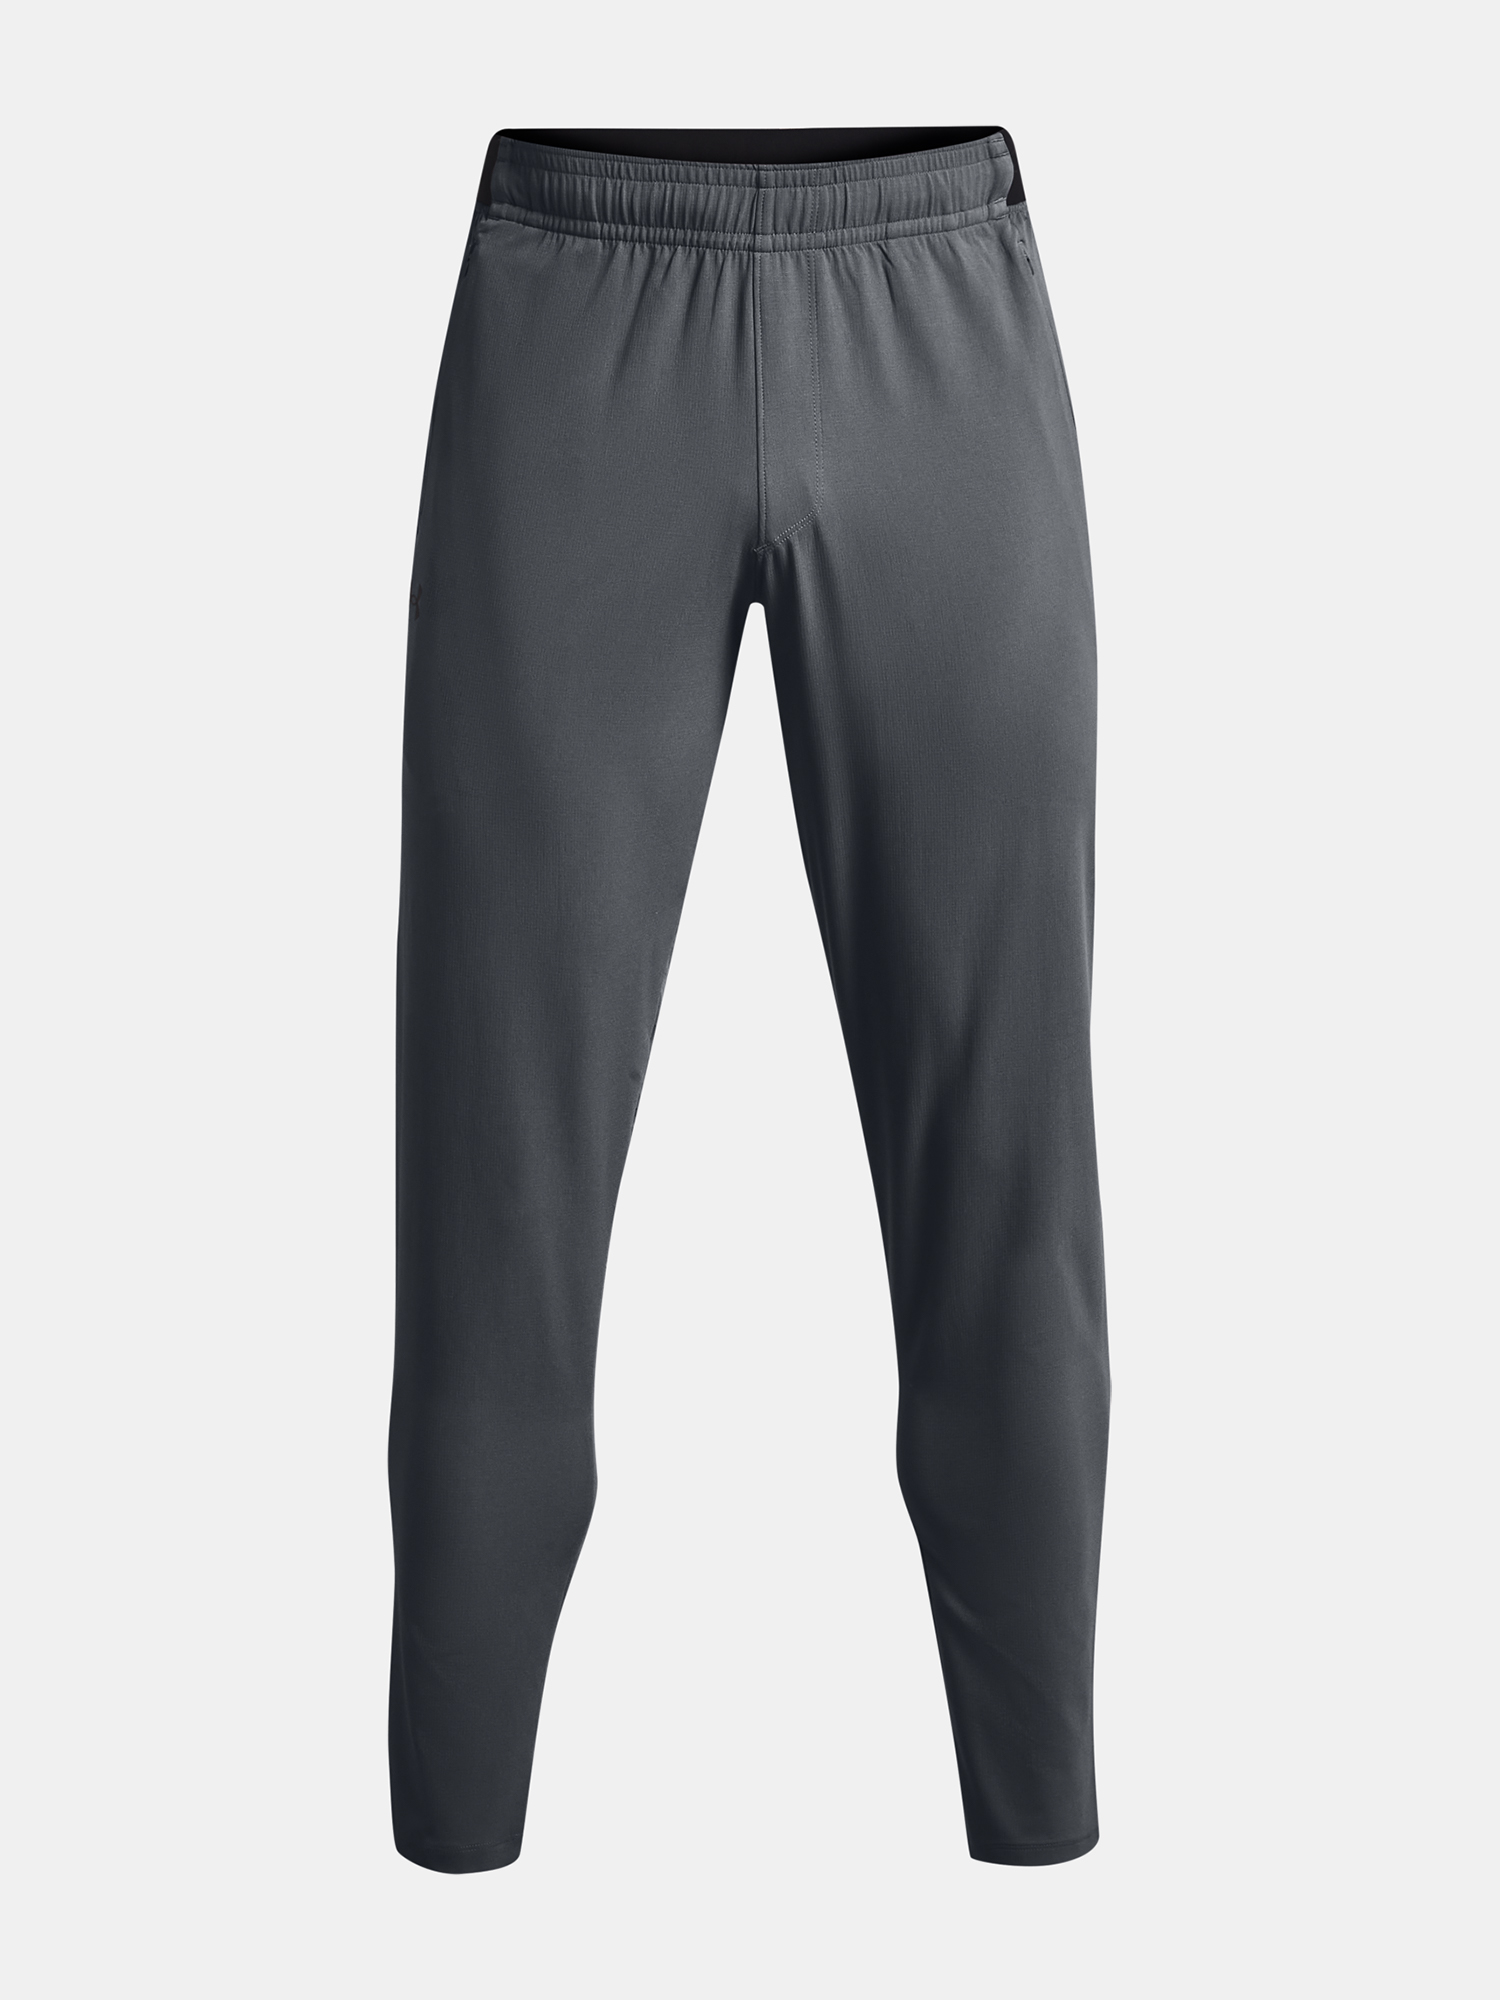 Under Armour tepláky Woven Pant gry Velikost: LG